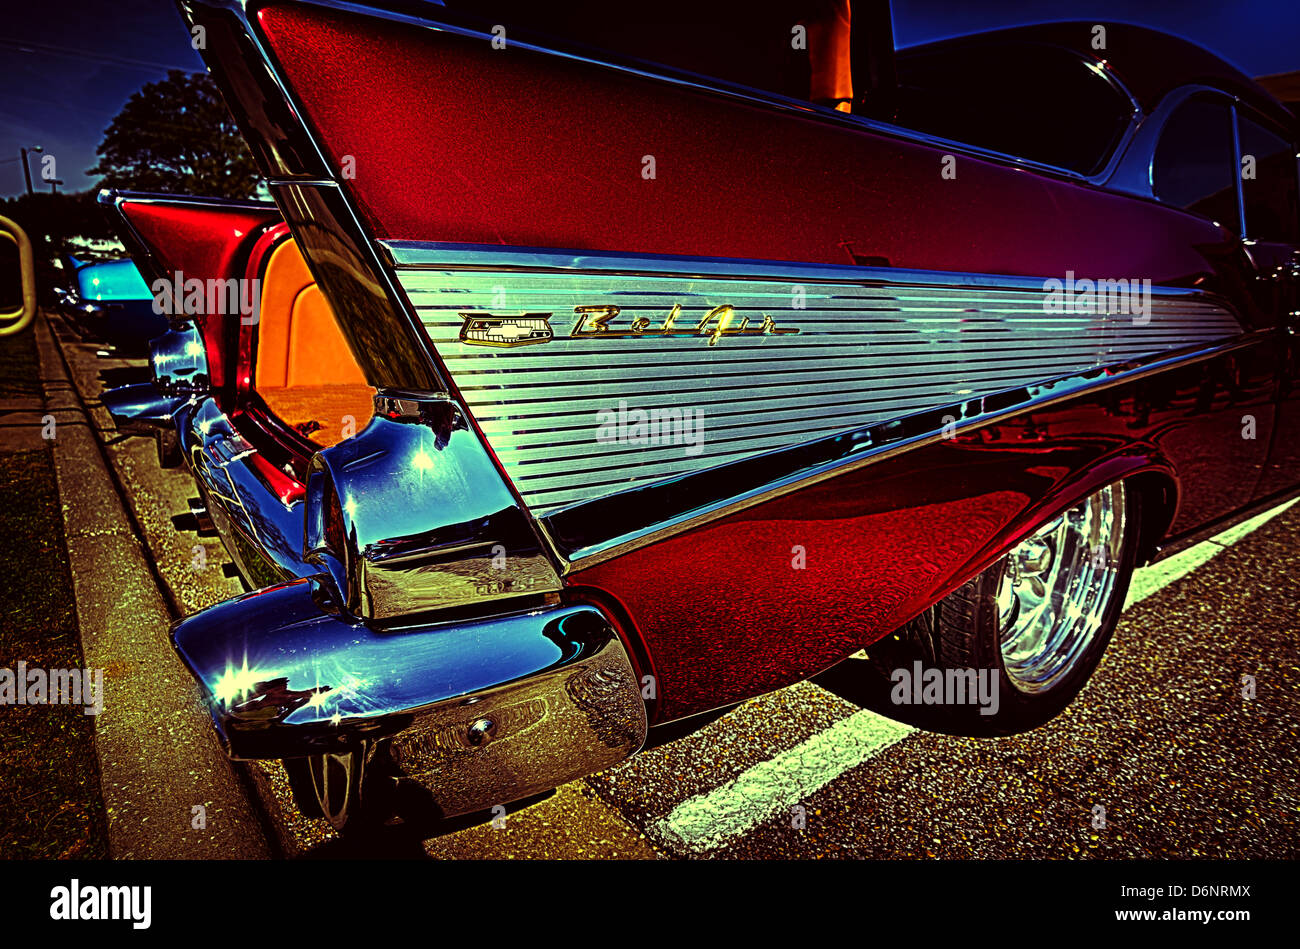 Back and side image of red Chevy Bel Air at car show. Stock Photo